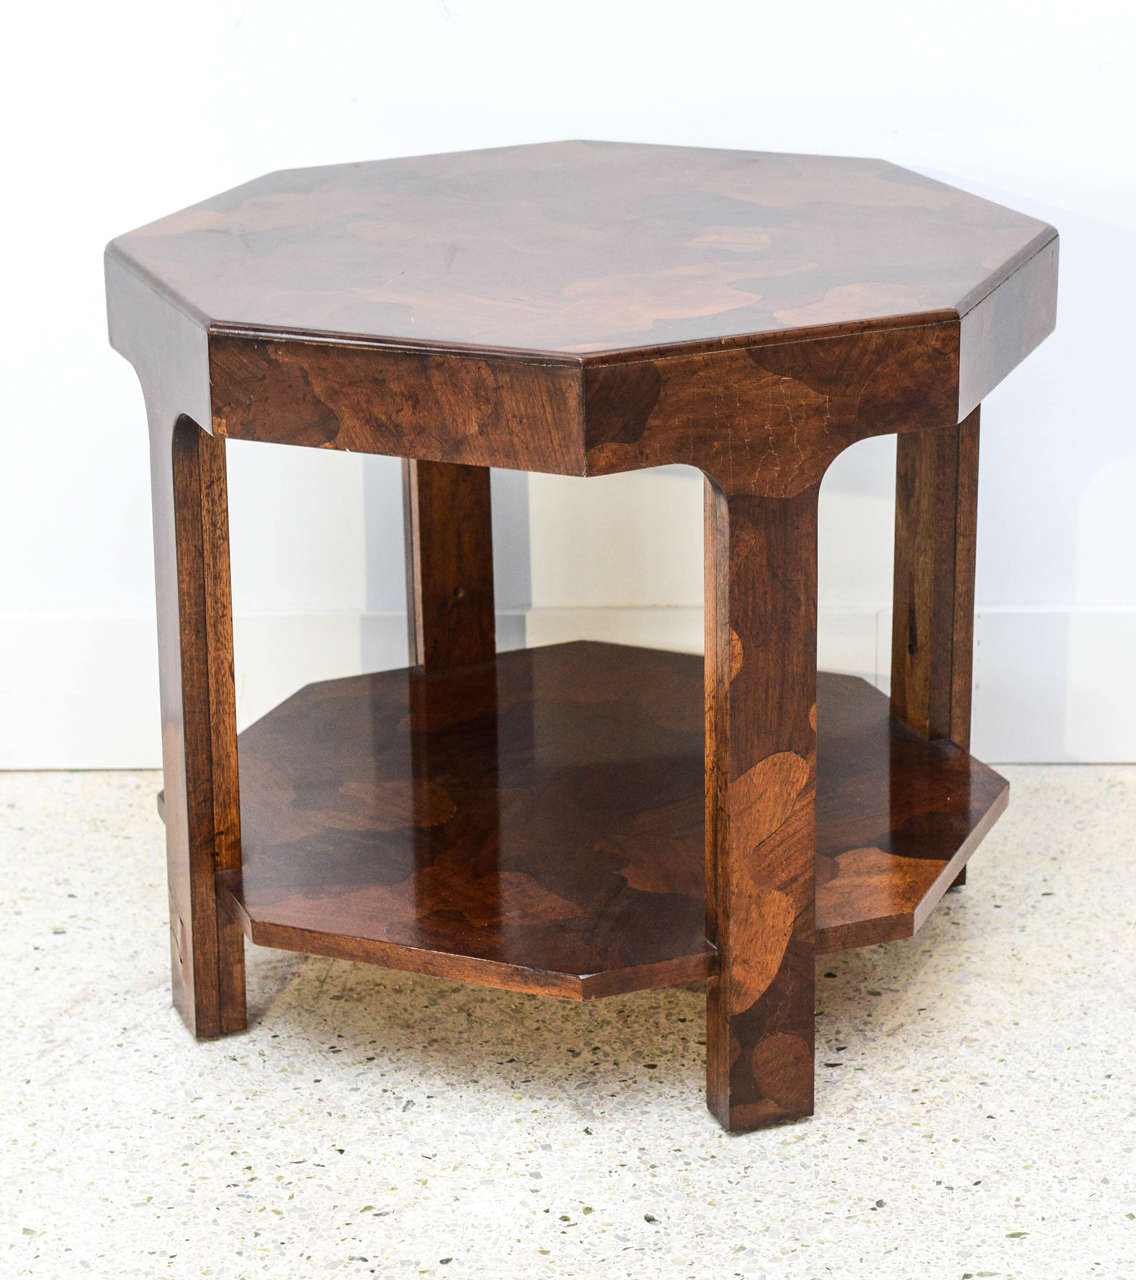 the exotically veneered octagonal top over square legs and a shelf, can be sold together or separately with companion square table